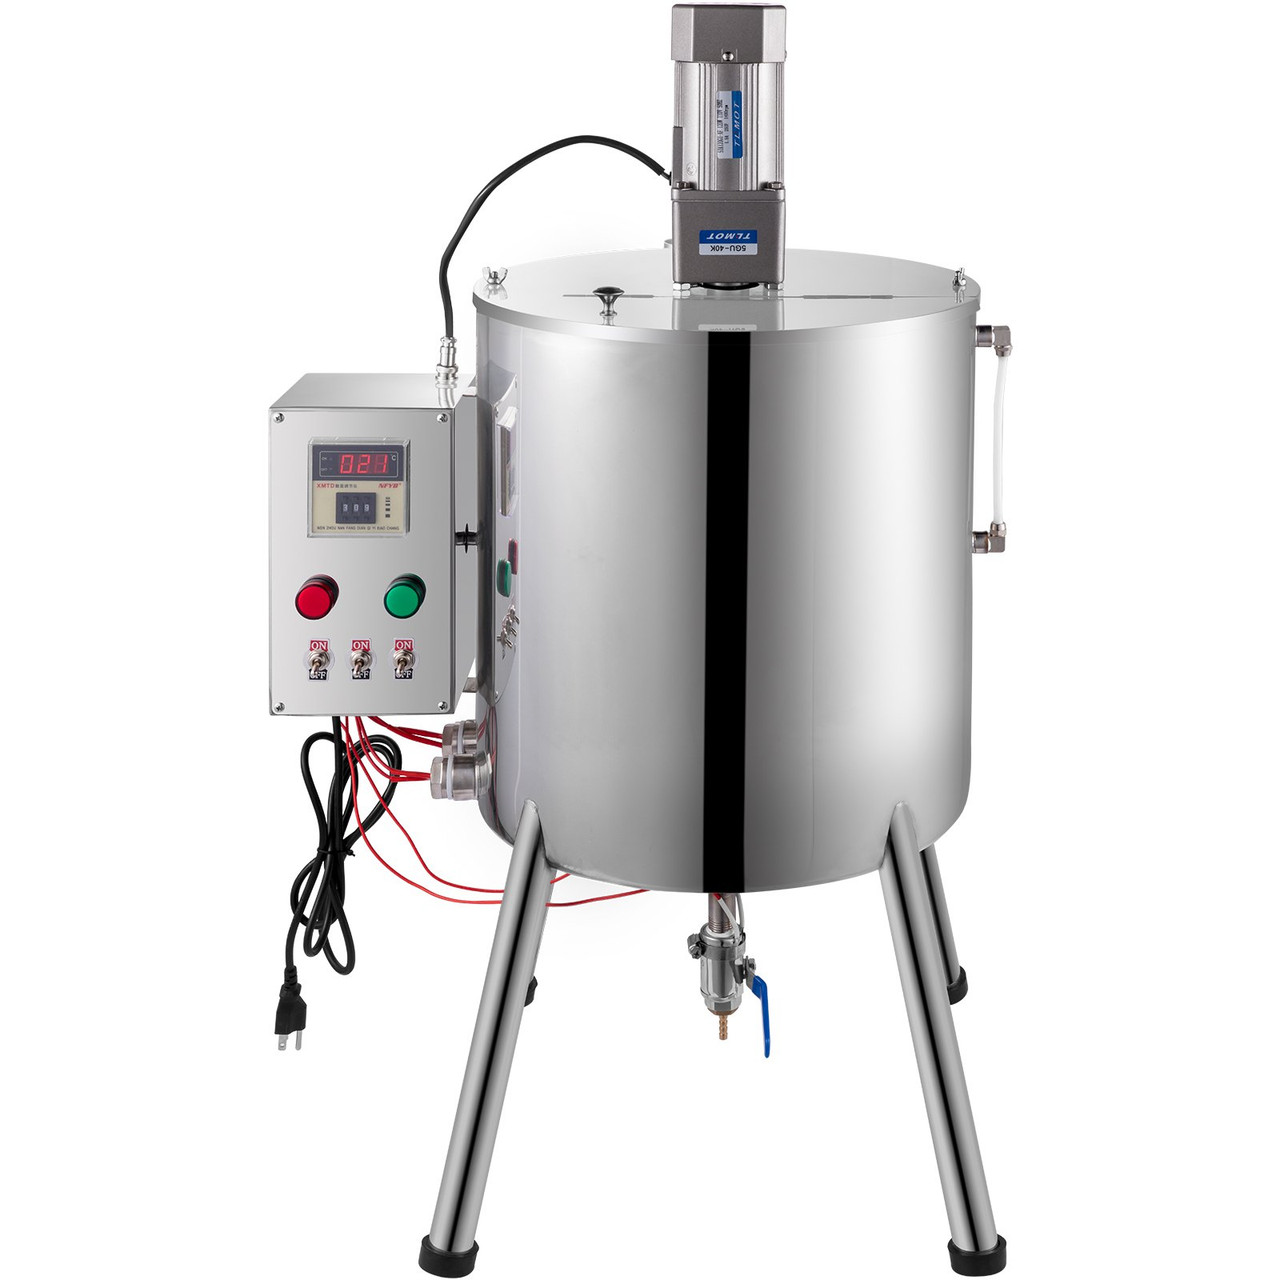 Heating Mixing Filling Machine, 30L/7.9 Gal Lipstick Filling Machine, 35W Lipstick Filler, Heating and Stirring Filling Machine with Stirrer for Cosmetics, Drink, Lipstick, Wax and Nail Polish